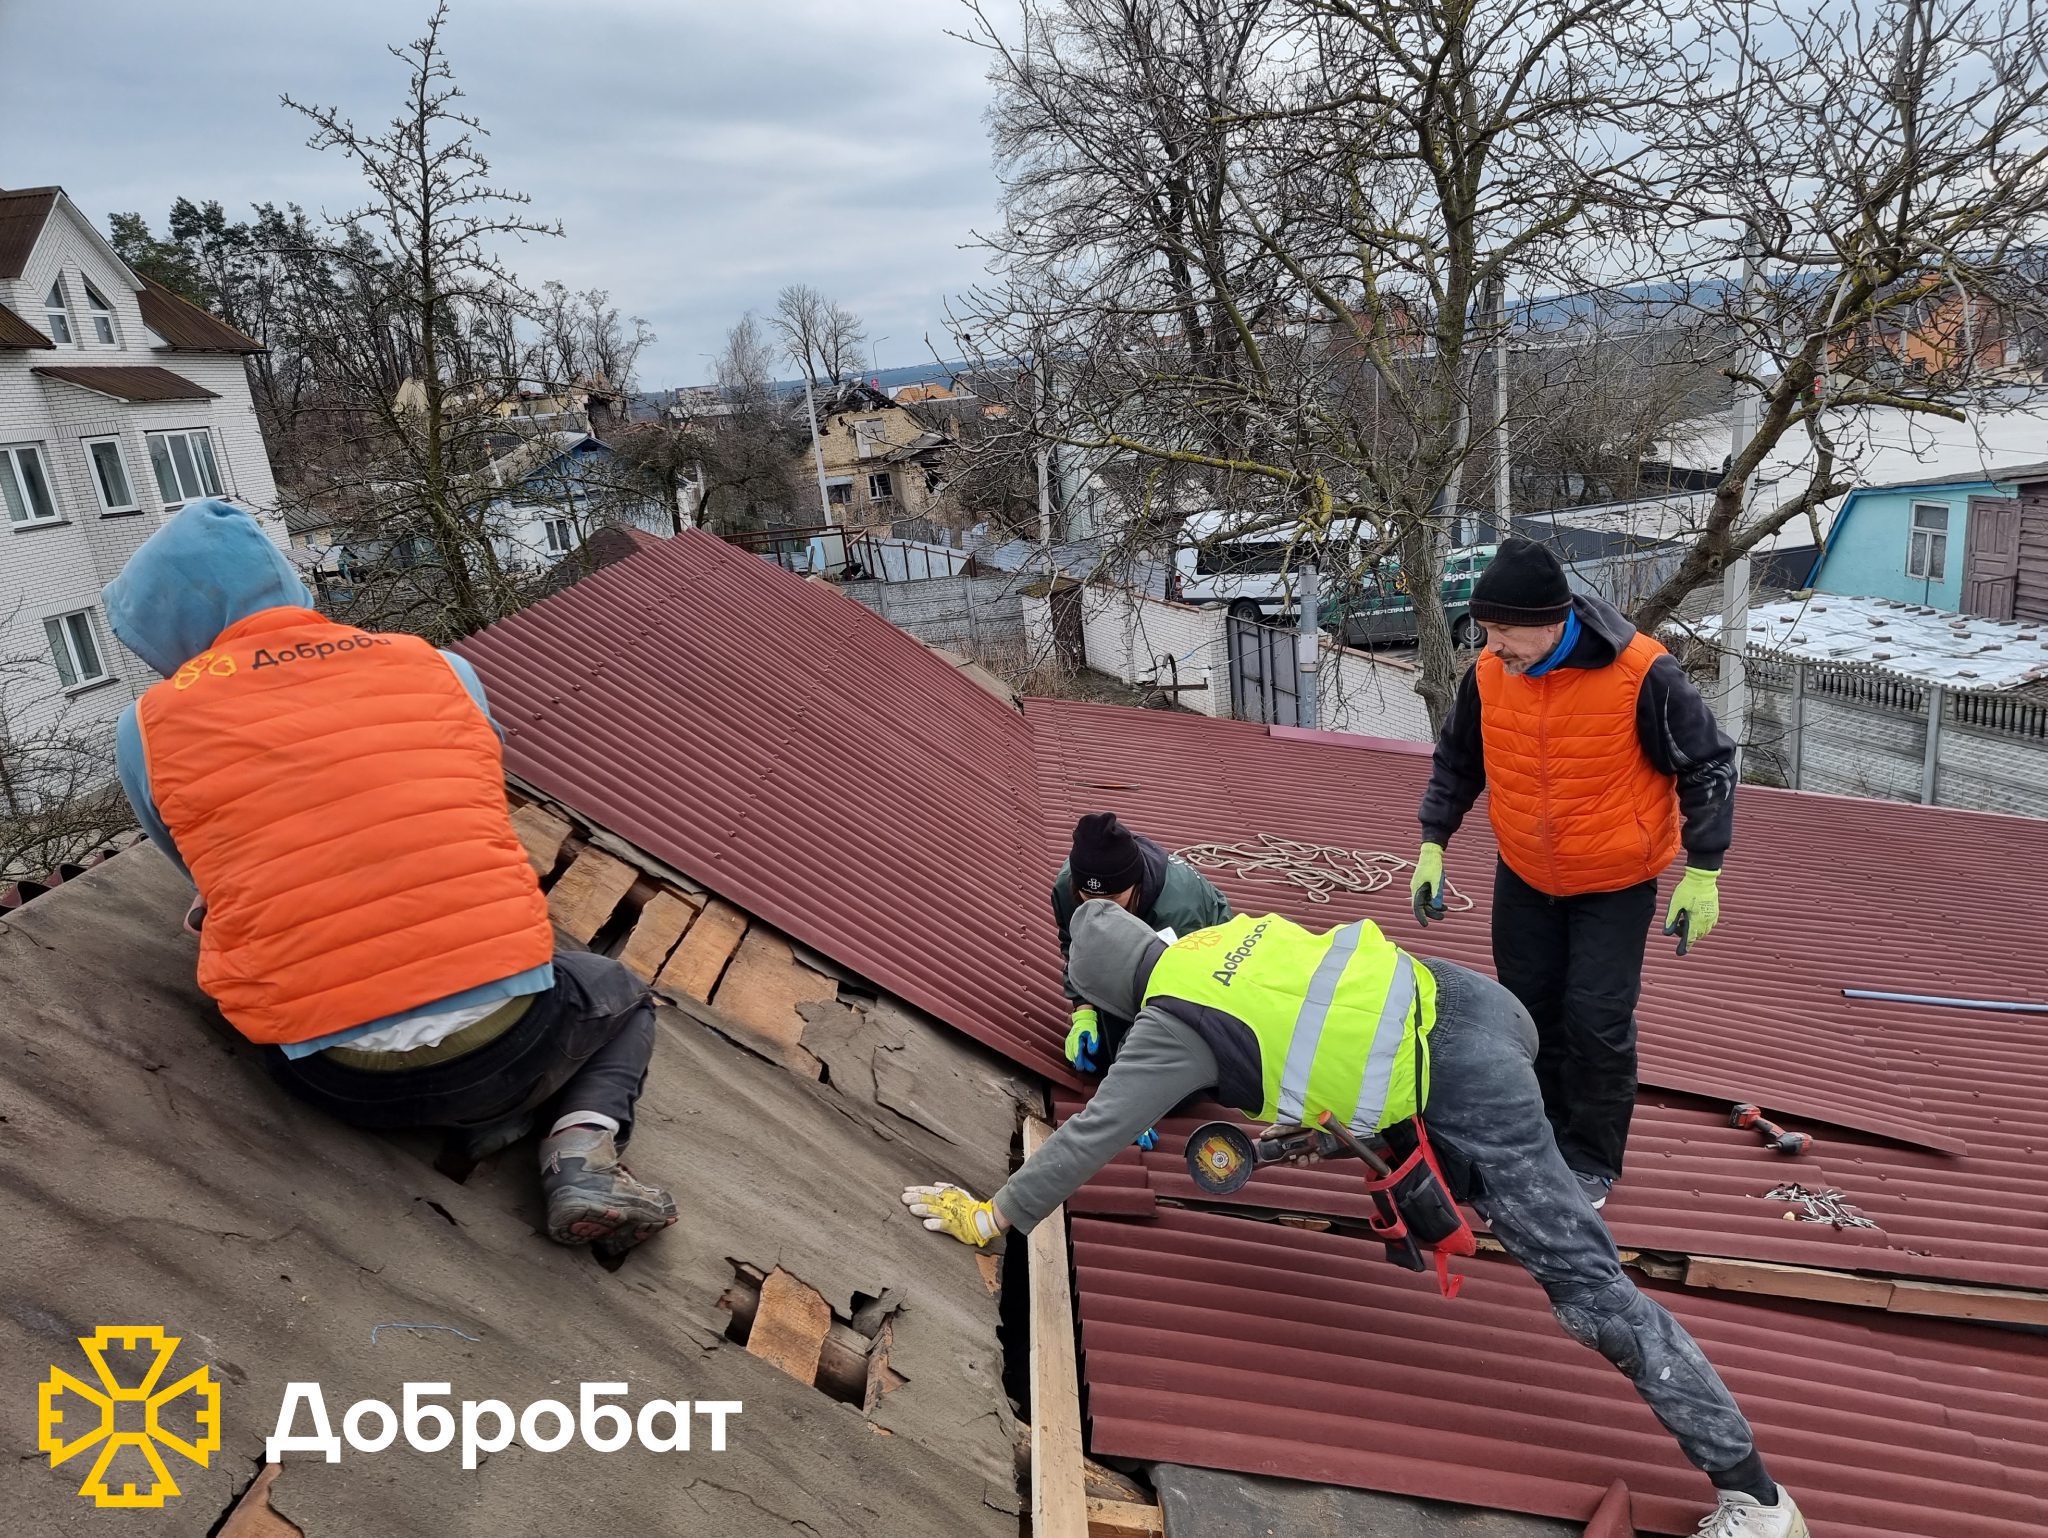 Four regions, 18 site visits, and 175 volunteers involved: Dobrobat reports on a week of reconstruction